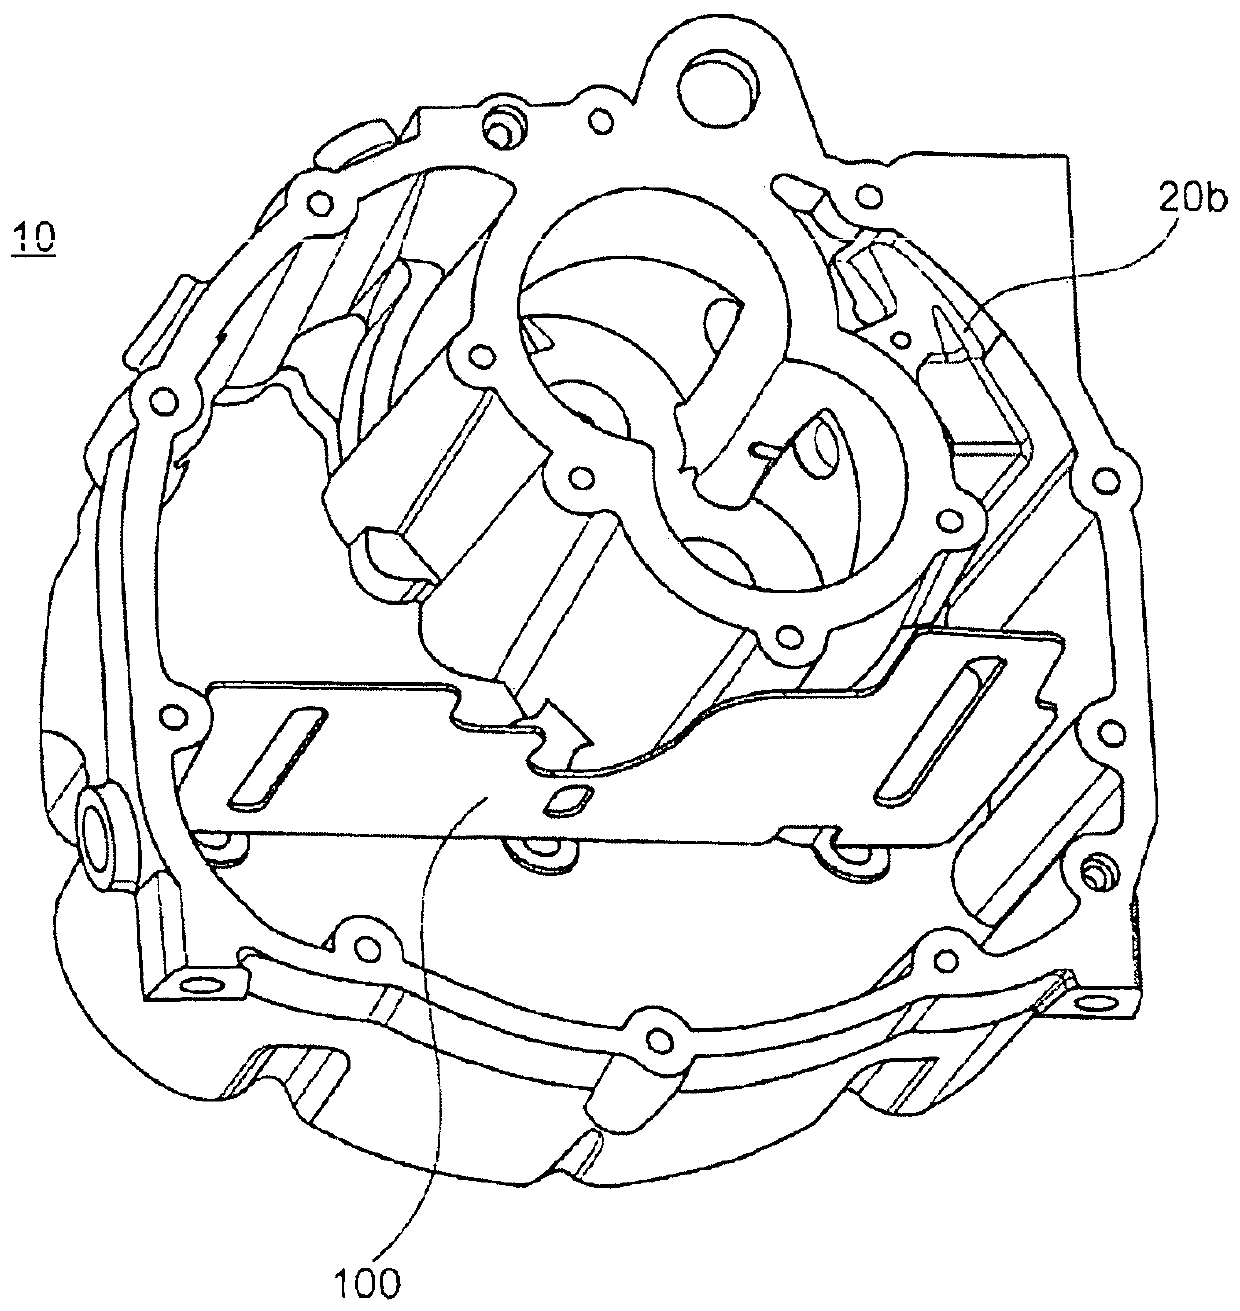 System for a screw compressor of a utility vehicle